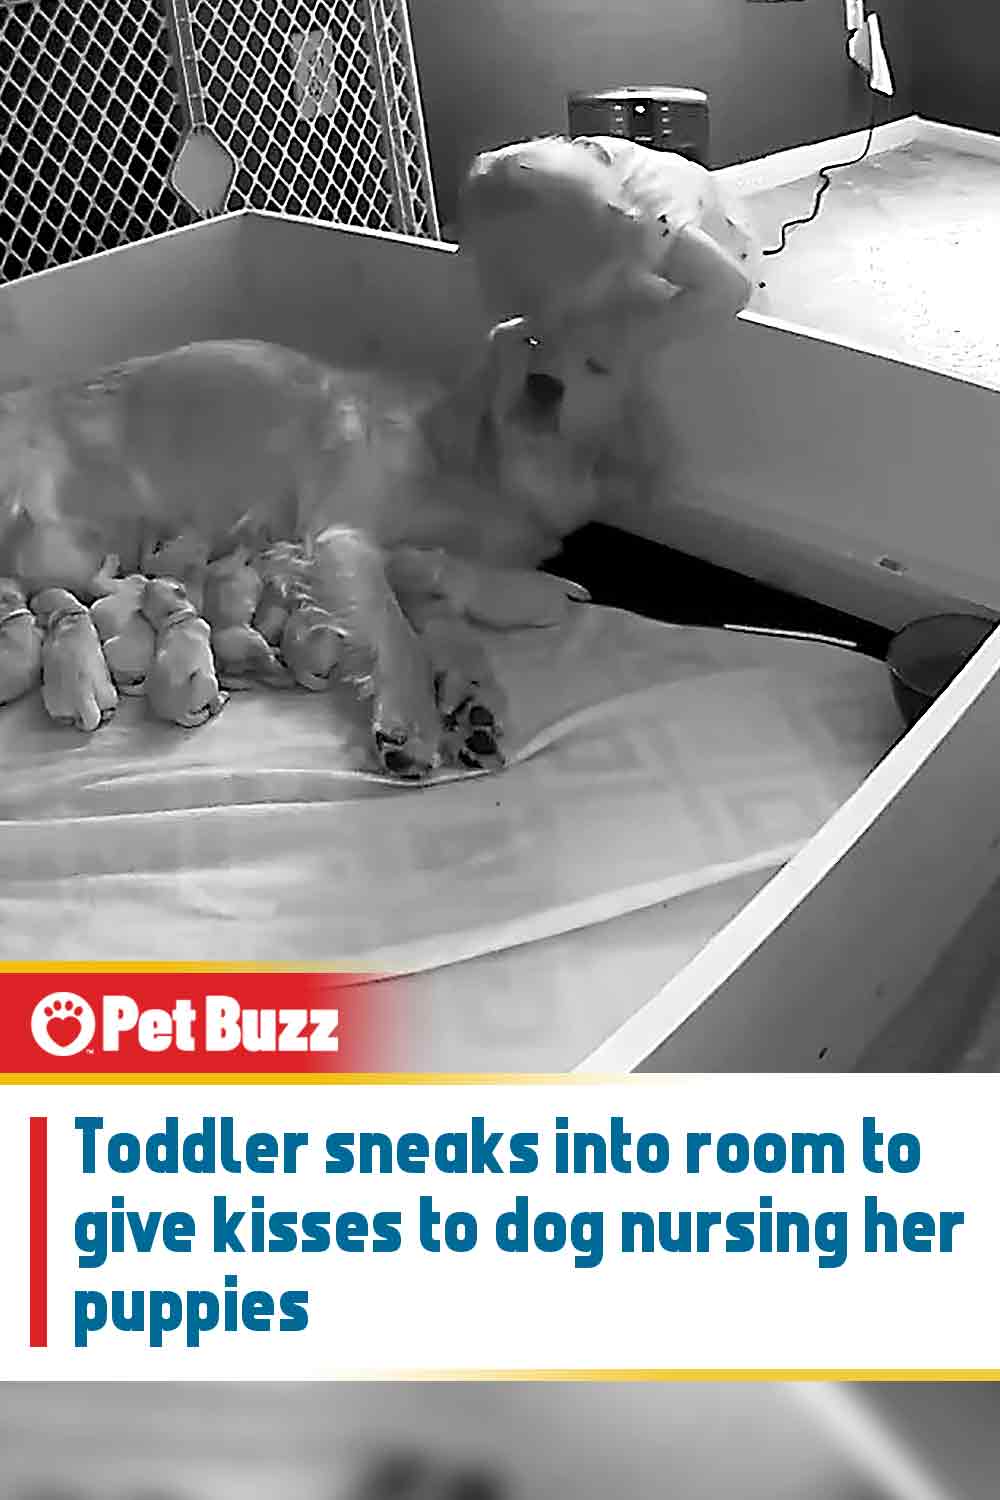 Toddler sneaks into room to give kisses to dog nursing her puppies